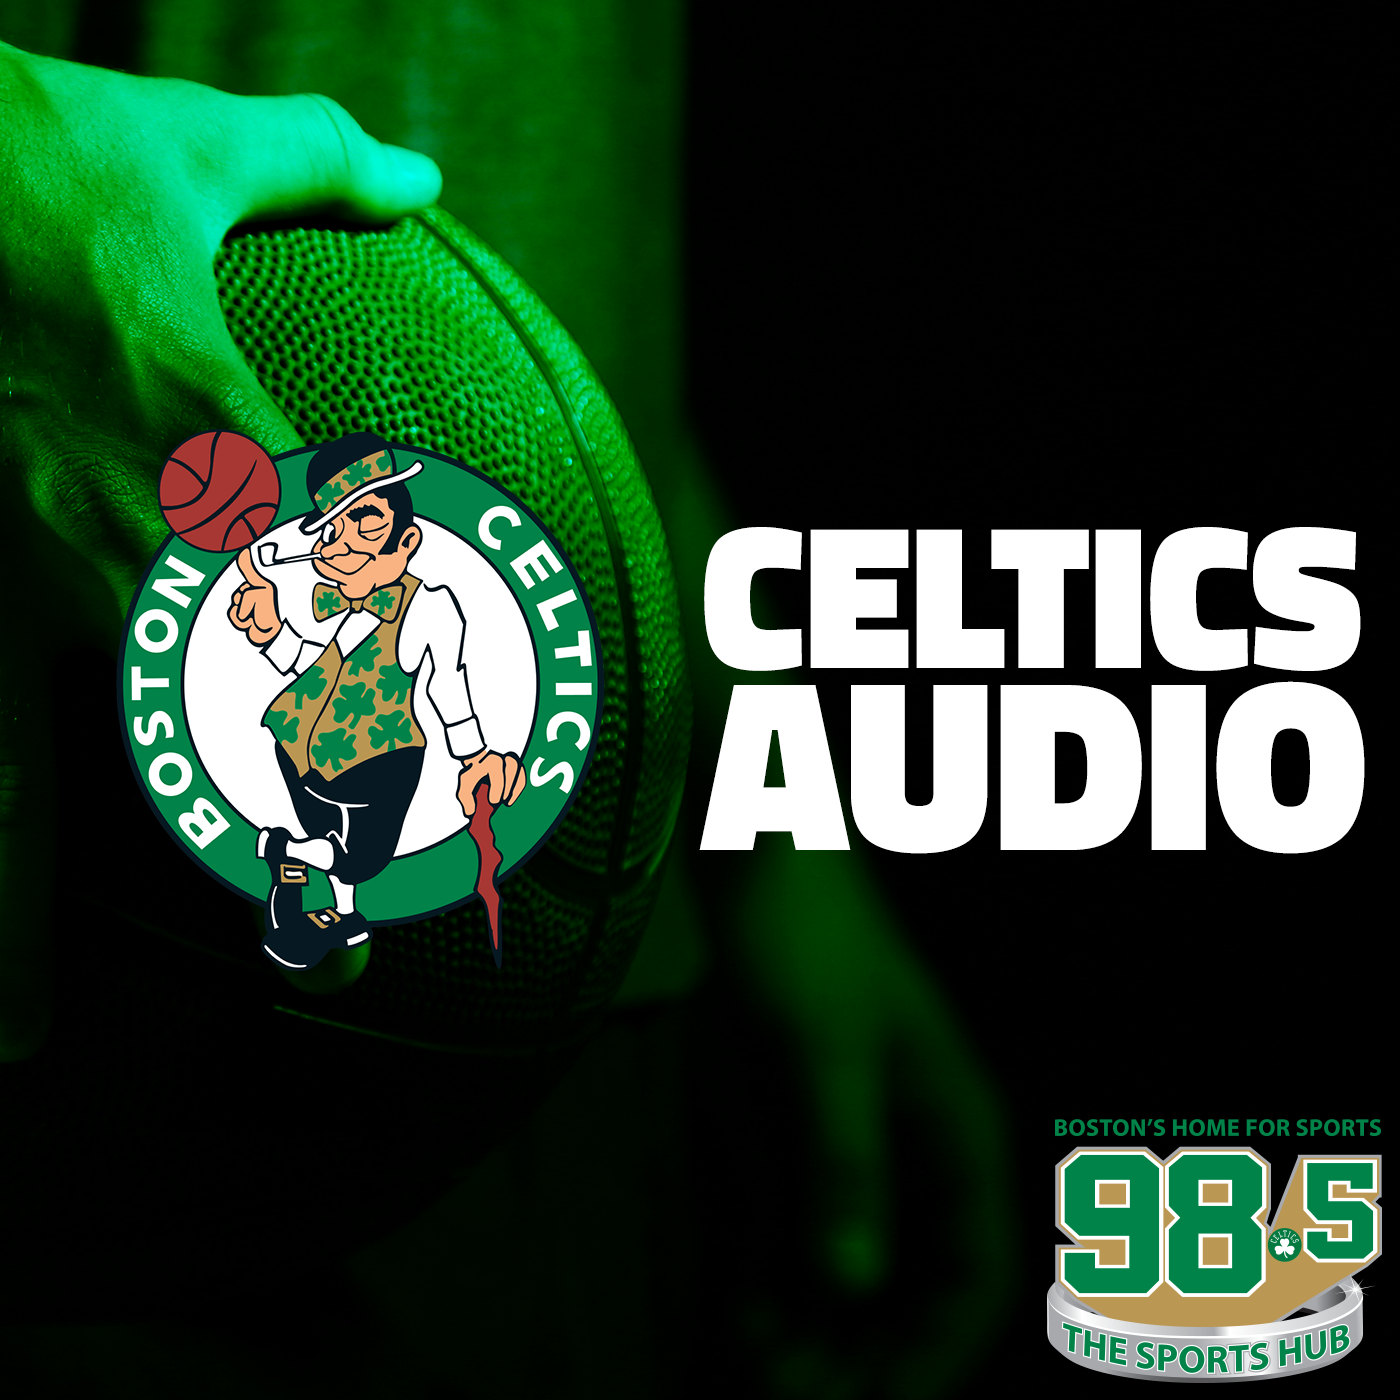 Jrue Holiday joins Grande and Max after Celtics beat the Knicks 114-98